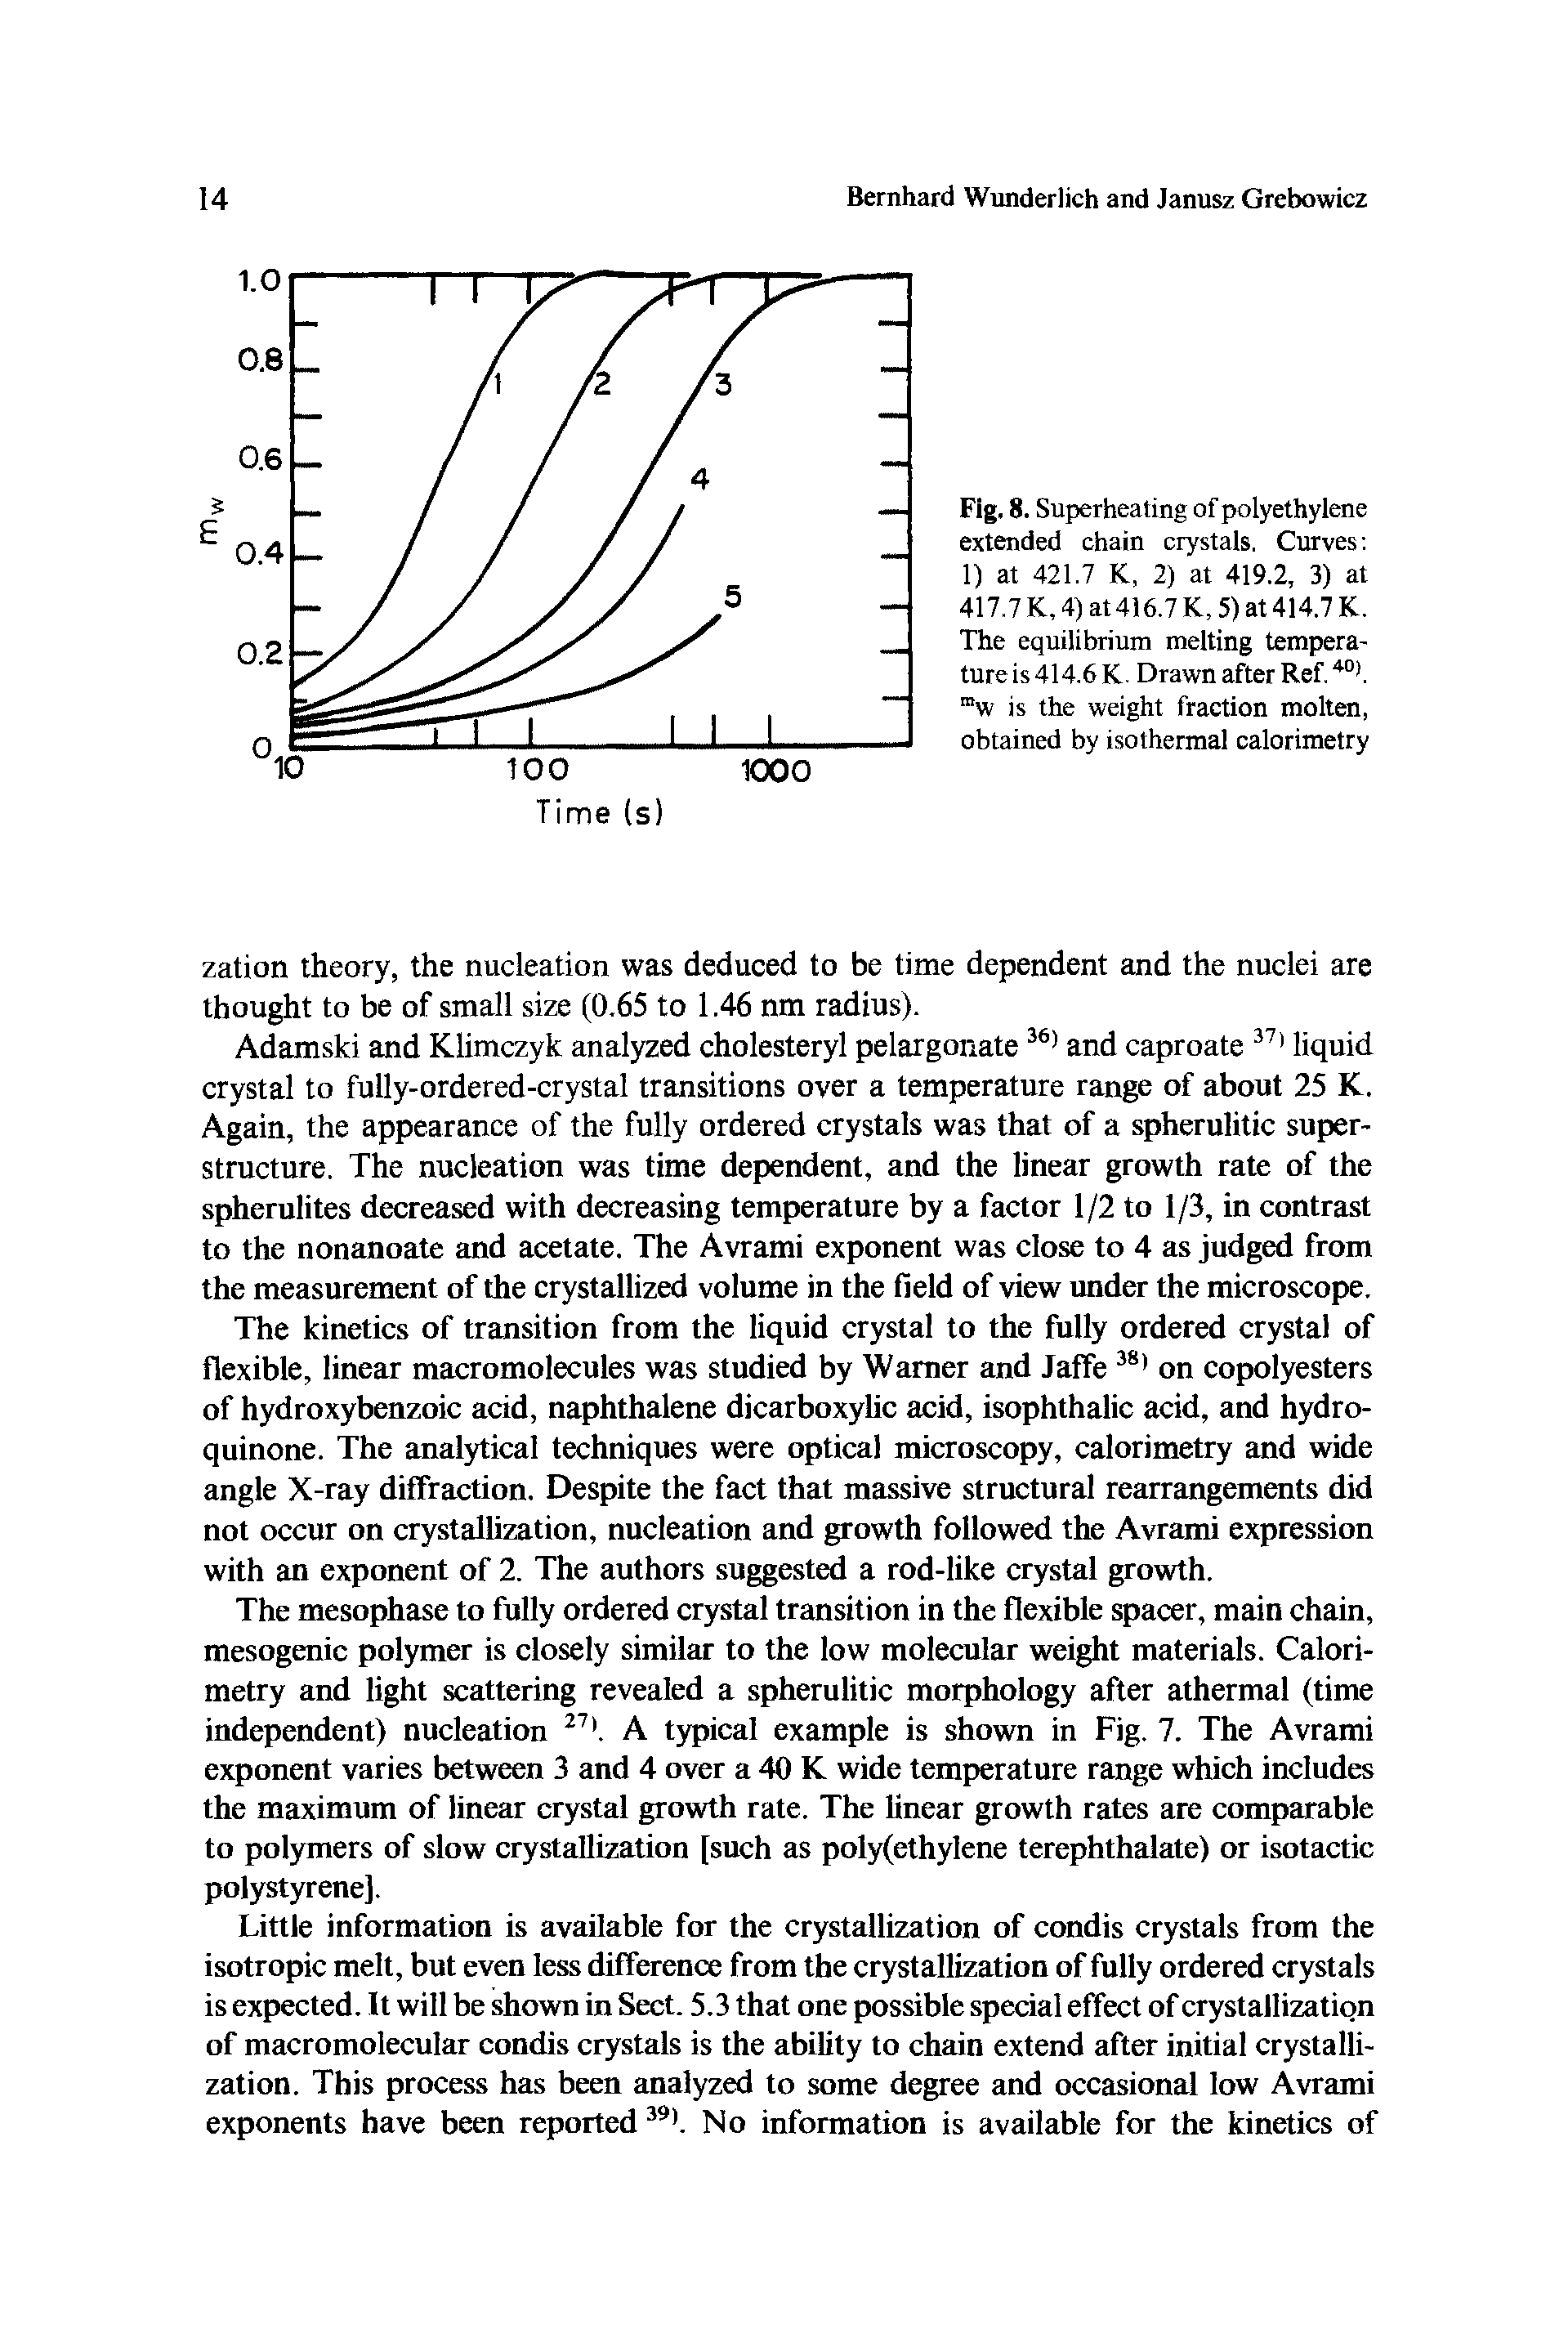 Fig. 8. Superheating of polyethylene extended chain crystals. Curves 1) at 421.7 K, 2) at 419.2, 3) at 417.7 K, 4) at416.7K, 5) at 414.7 K. The equilibrium melting temperature is 414.6 K. Drawn after Ref.40). "w is the weight fraction molten, obtained by isothermal calorimetry...